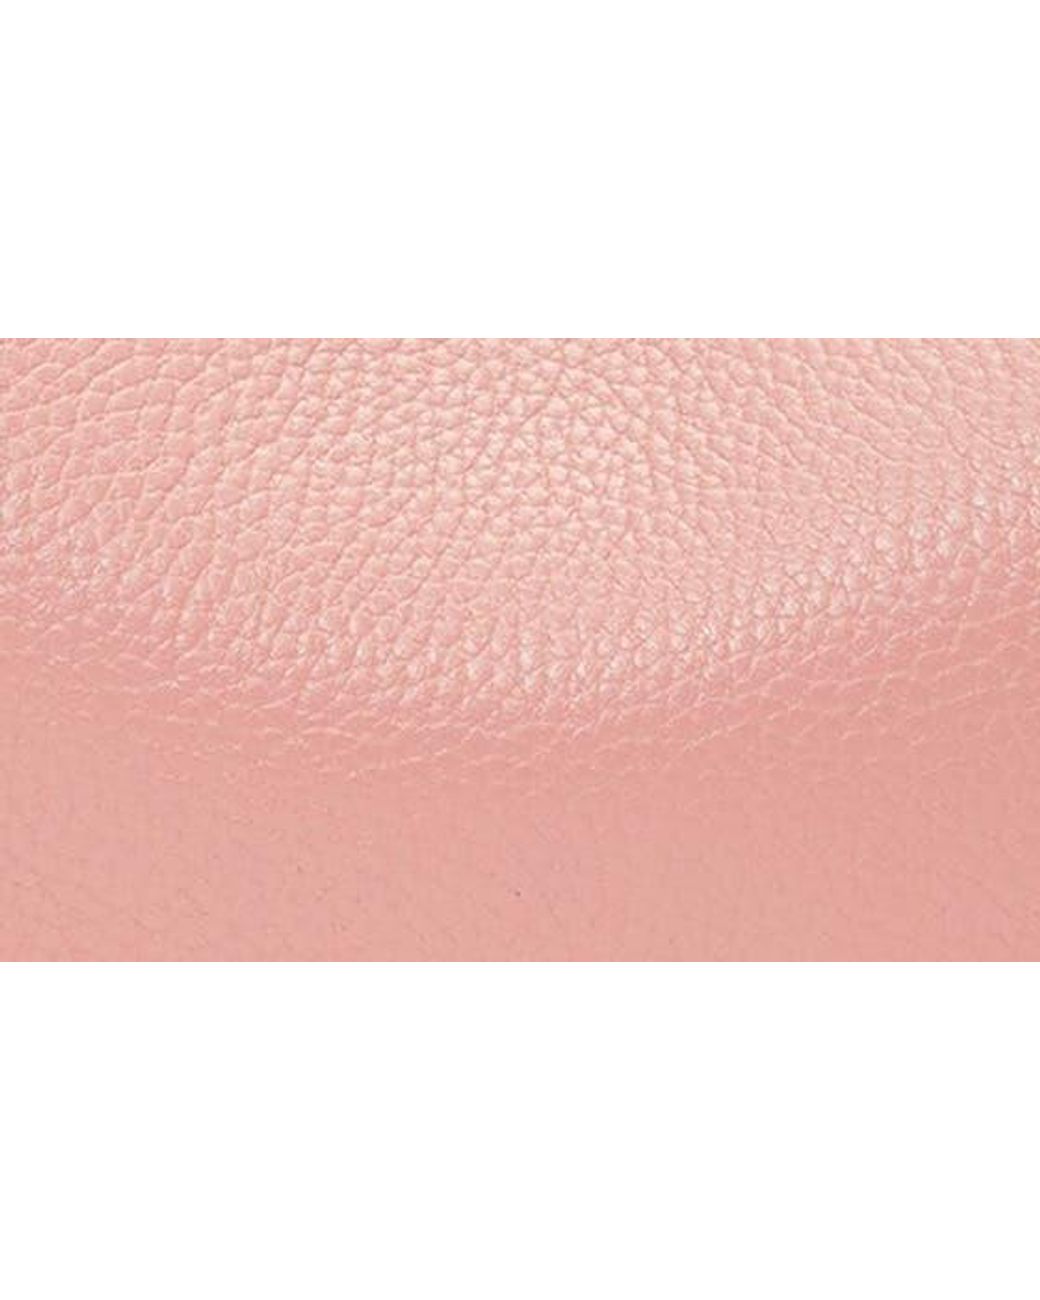 Kate Spade Small Smile Pebbled Leather Crossbody Bag in Pink